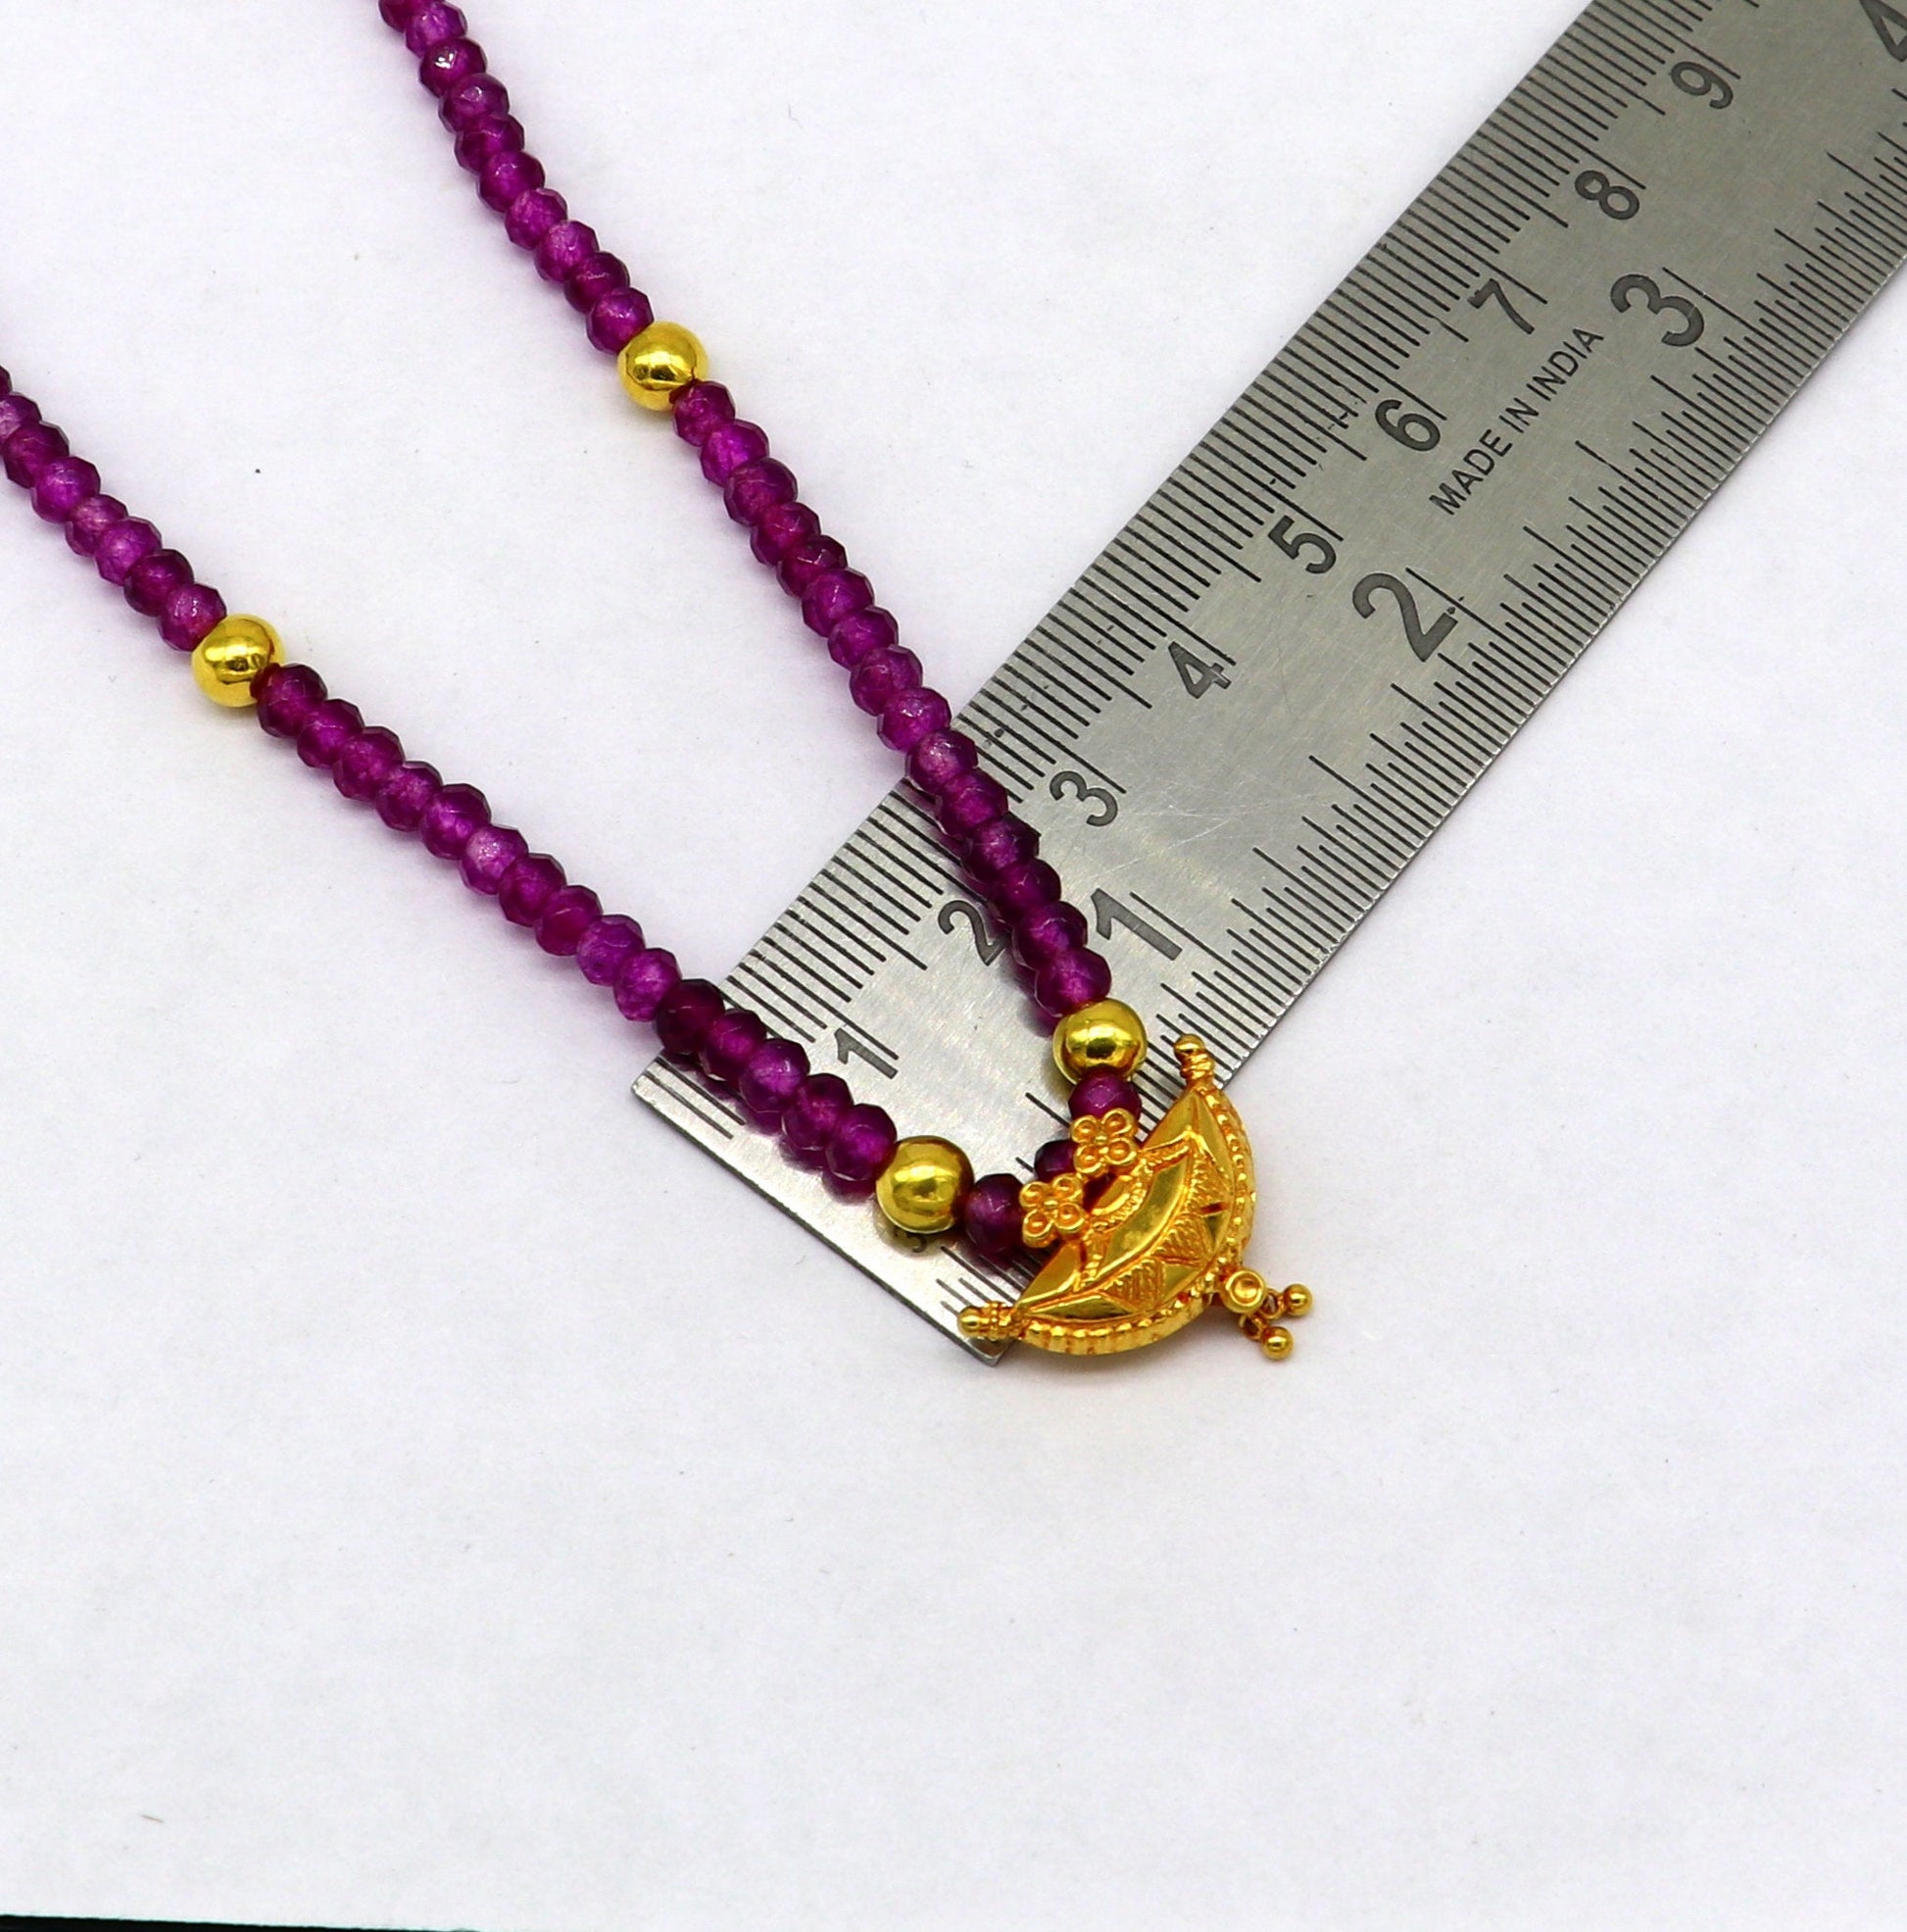 18" purple faceted beaded necklace, 20kt yellow gold amulet stylish pendant, excellent customized brides gift tribal ethnic jewelry ap06 - TRIBAL ORNAMENTS